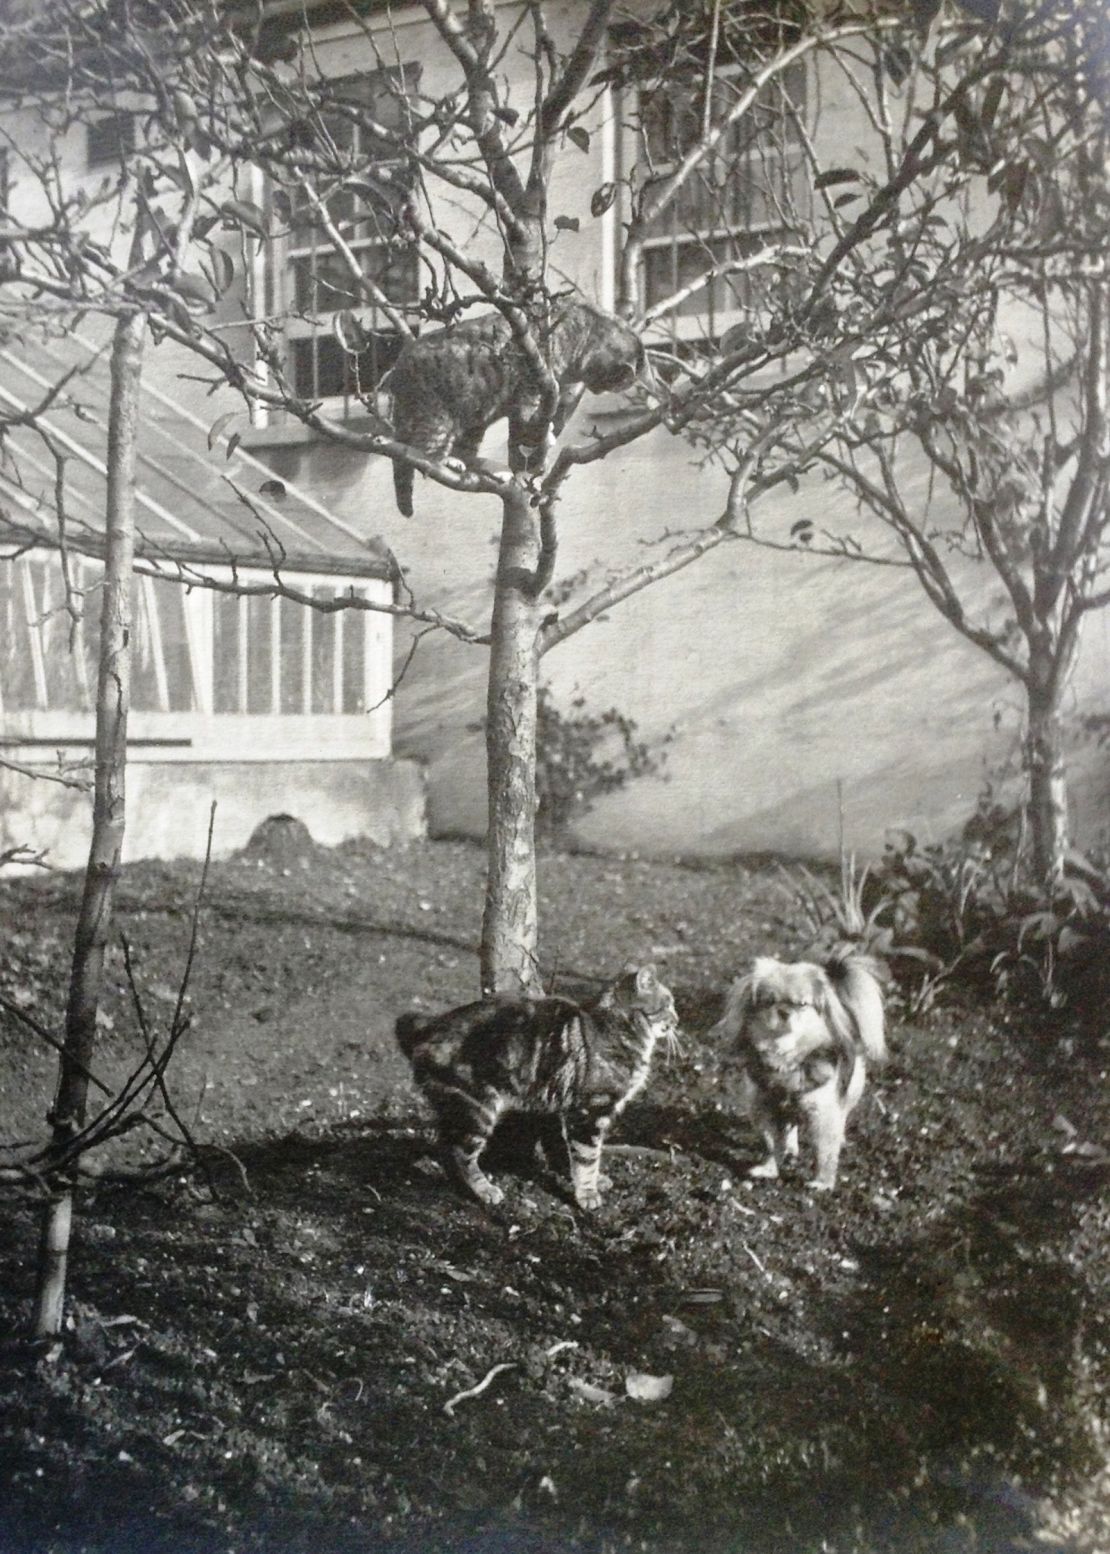 Kylin the Pekingese dog, who lived from 1909 to 1924, pictured with some cats in the gardens of Preston Manor in Brighton and Hove, UK.